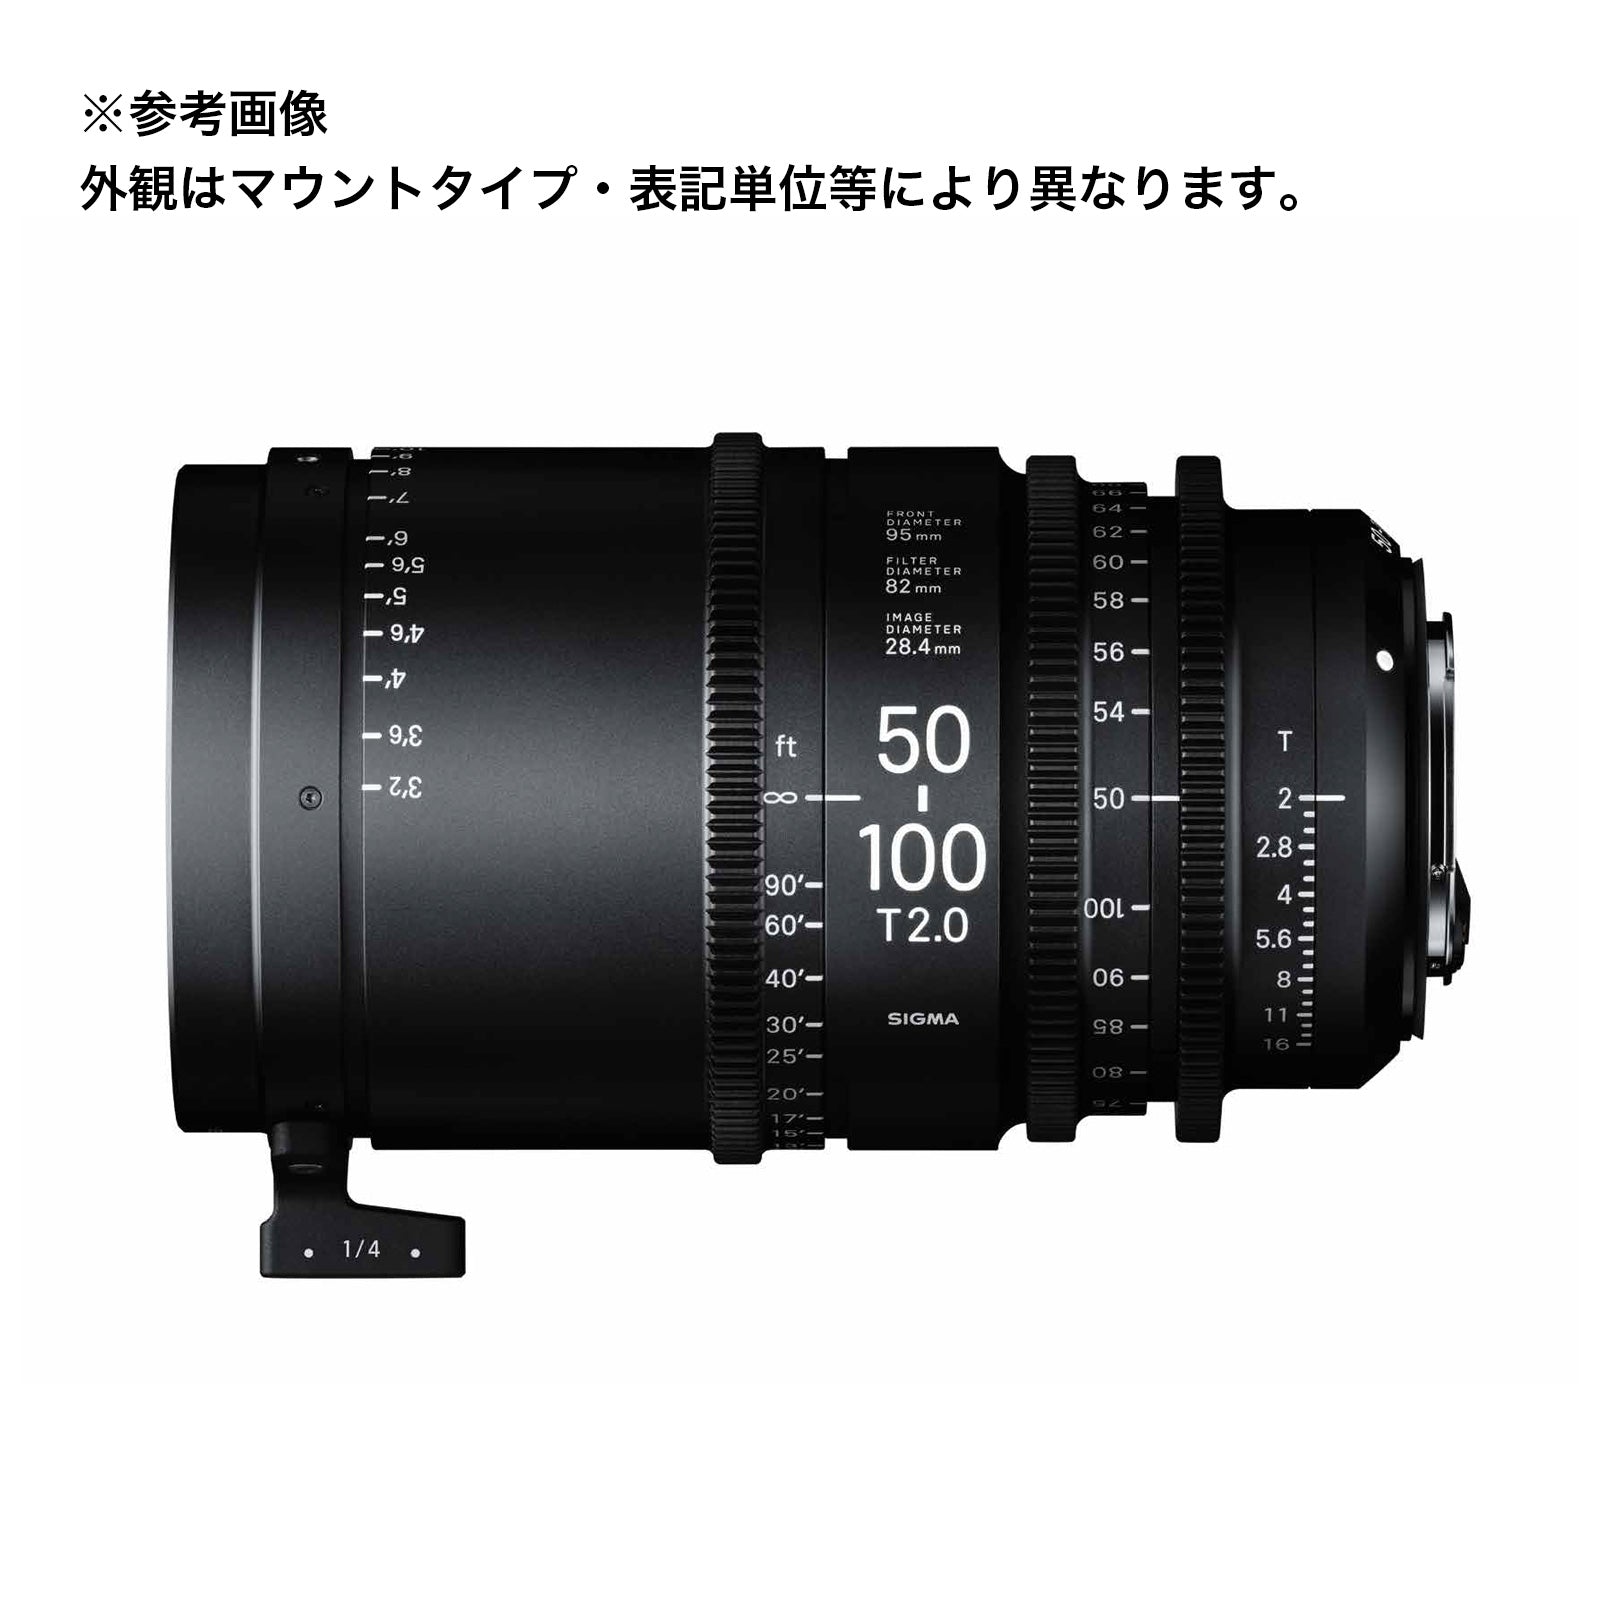 SIGMA(シグマ) CINE LENS High Speed Zoom Line 50-100mm T2 / PLマウント フィート表記